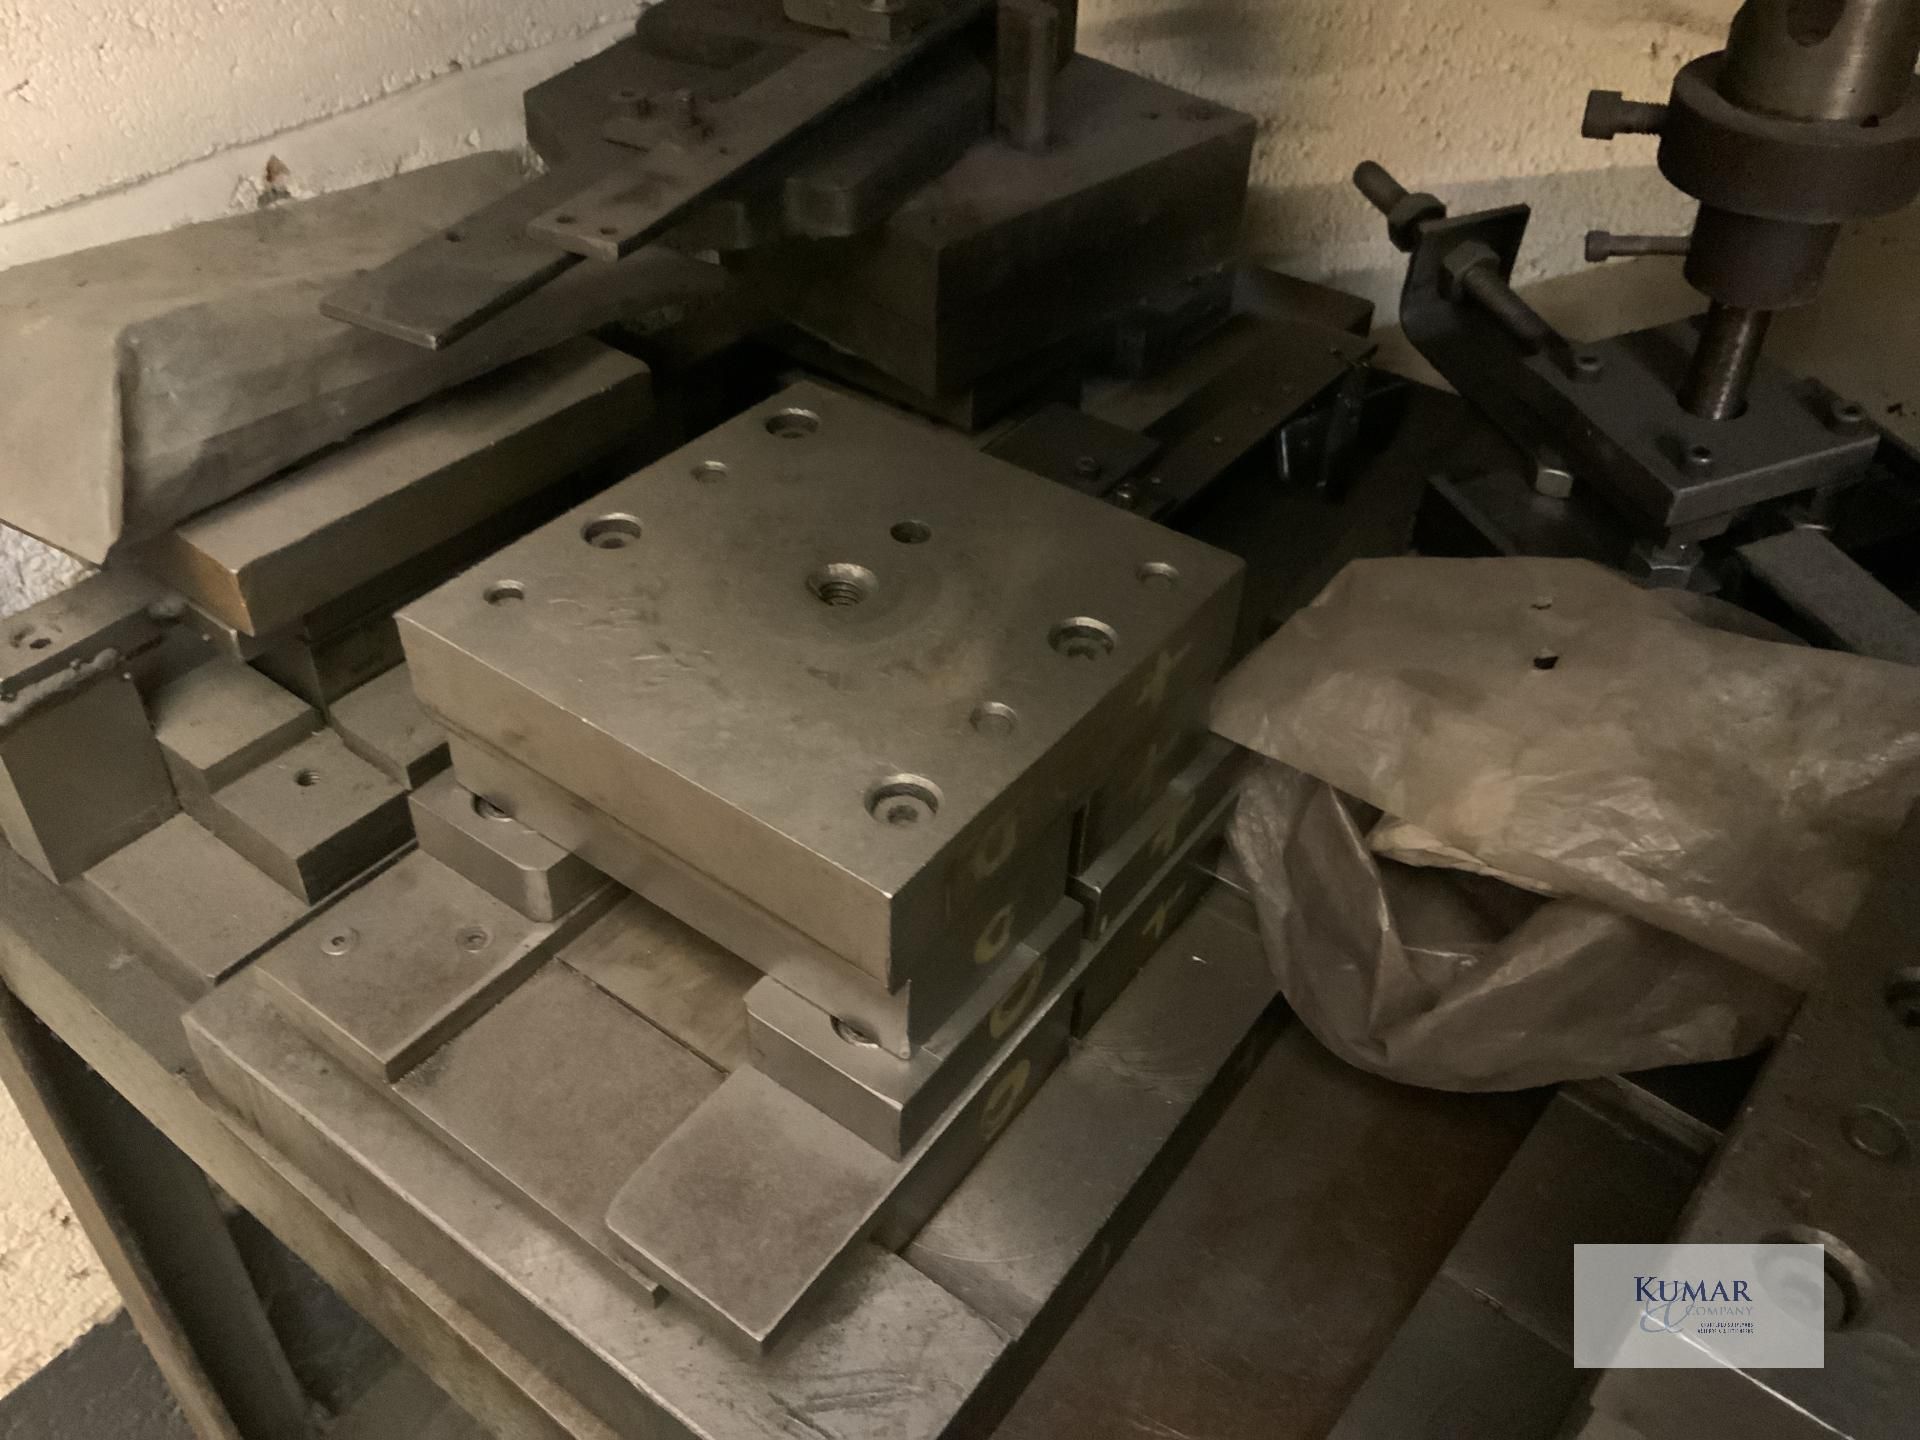 Machine tooling as imaged  Collection Day – Tuesday 27th February Unit 4 Goscote Industrial - Image 5 of 9